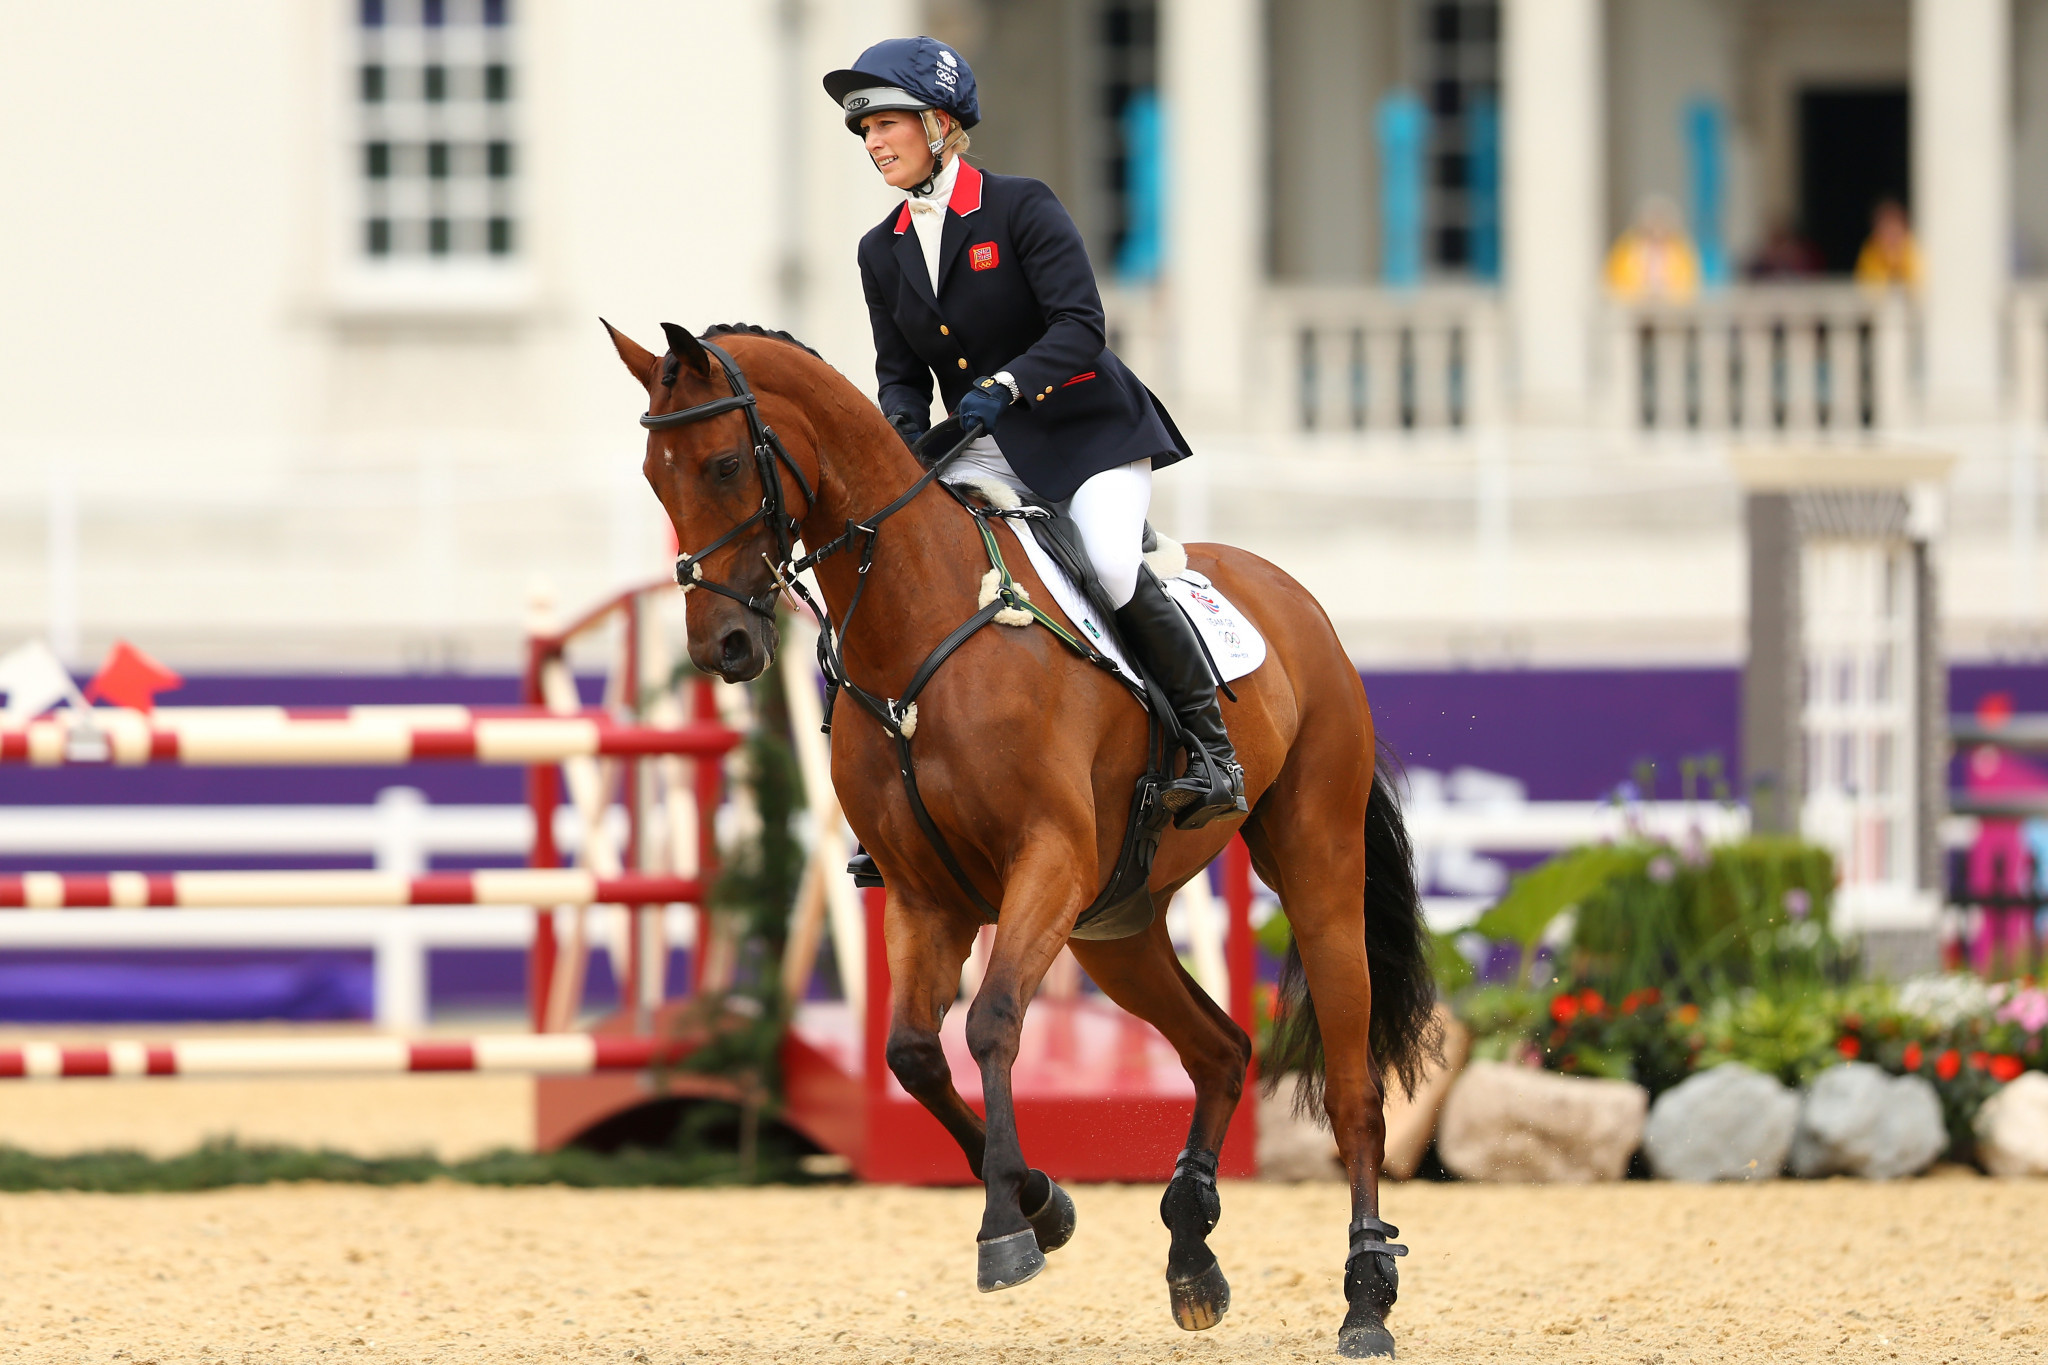 Tindall searching for suitable horse as she aims to compete at Paris 2024